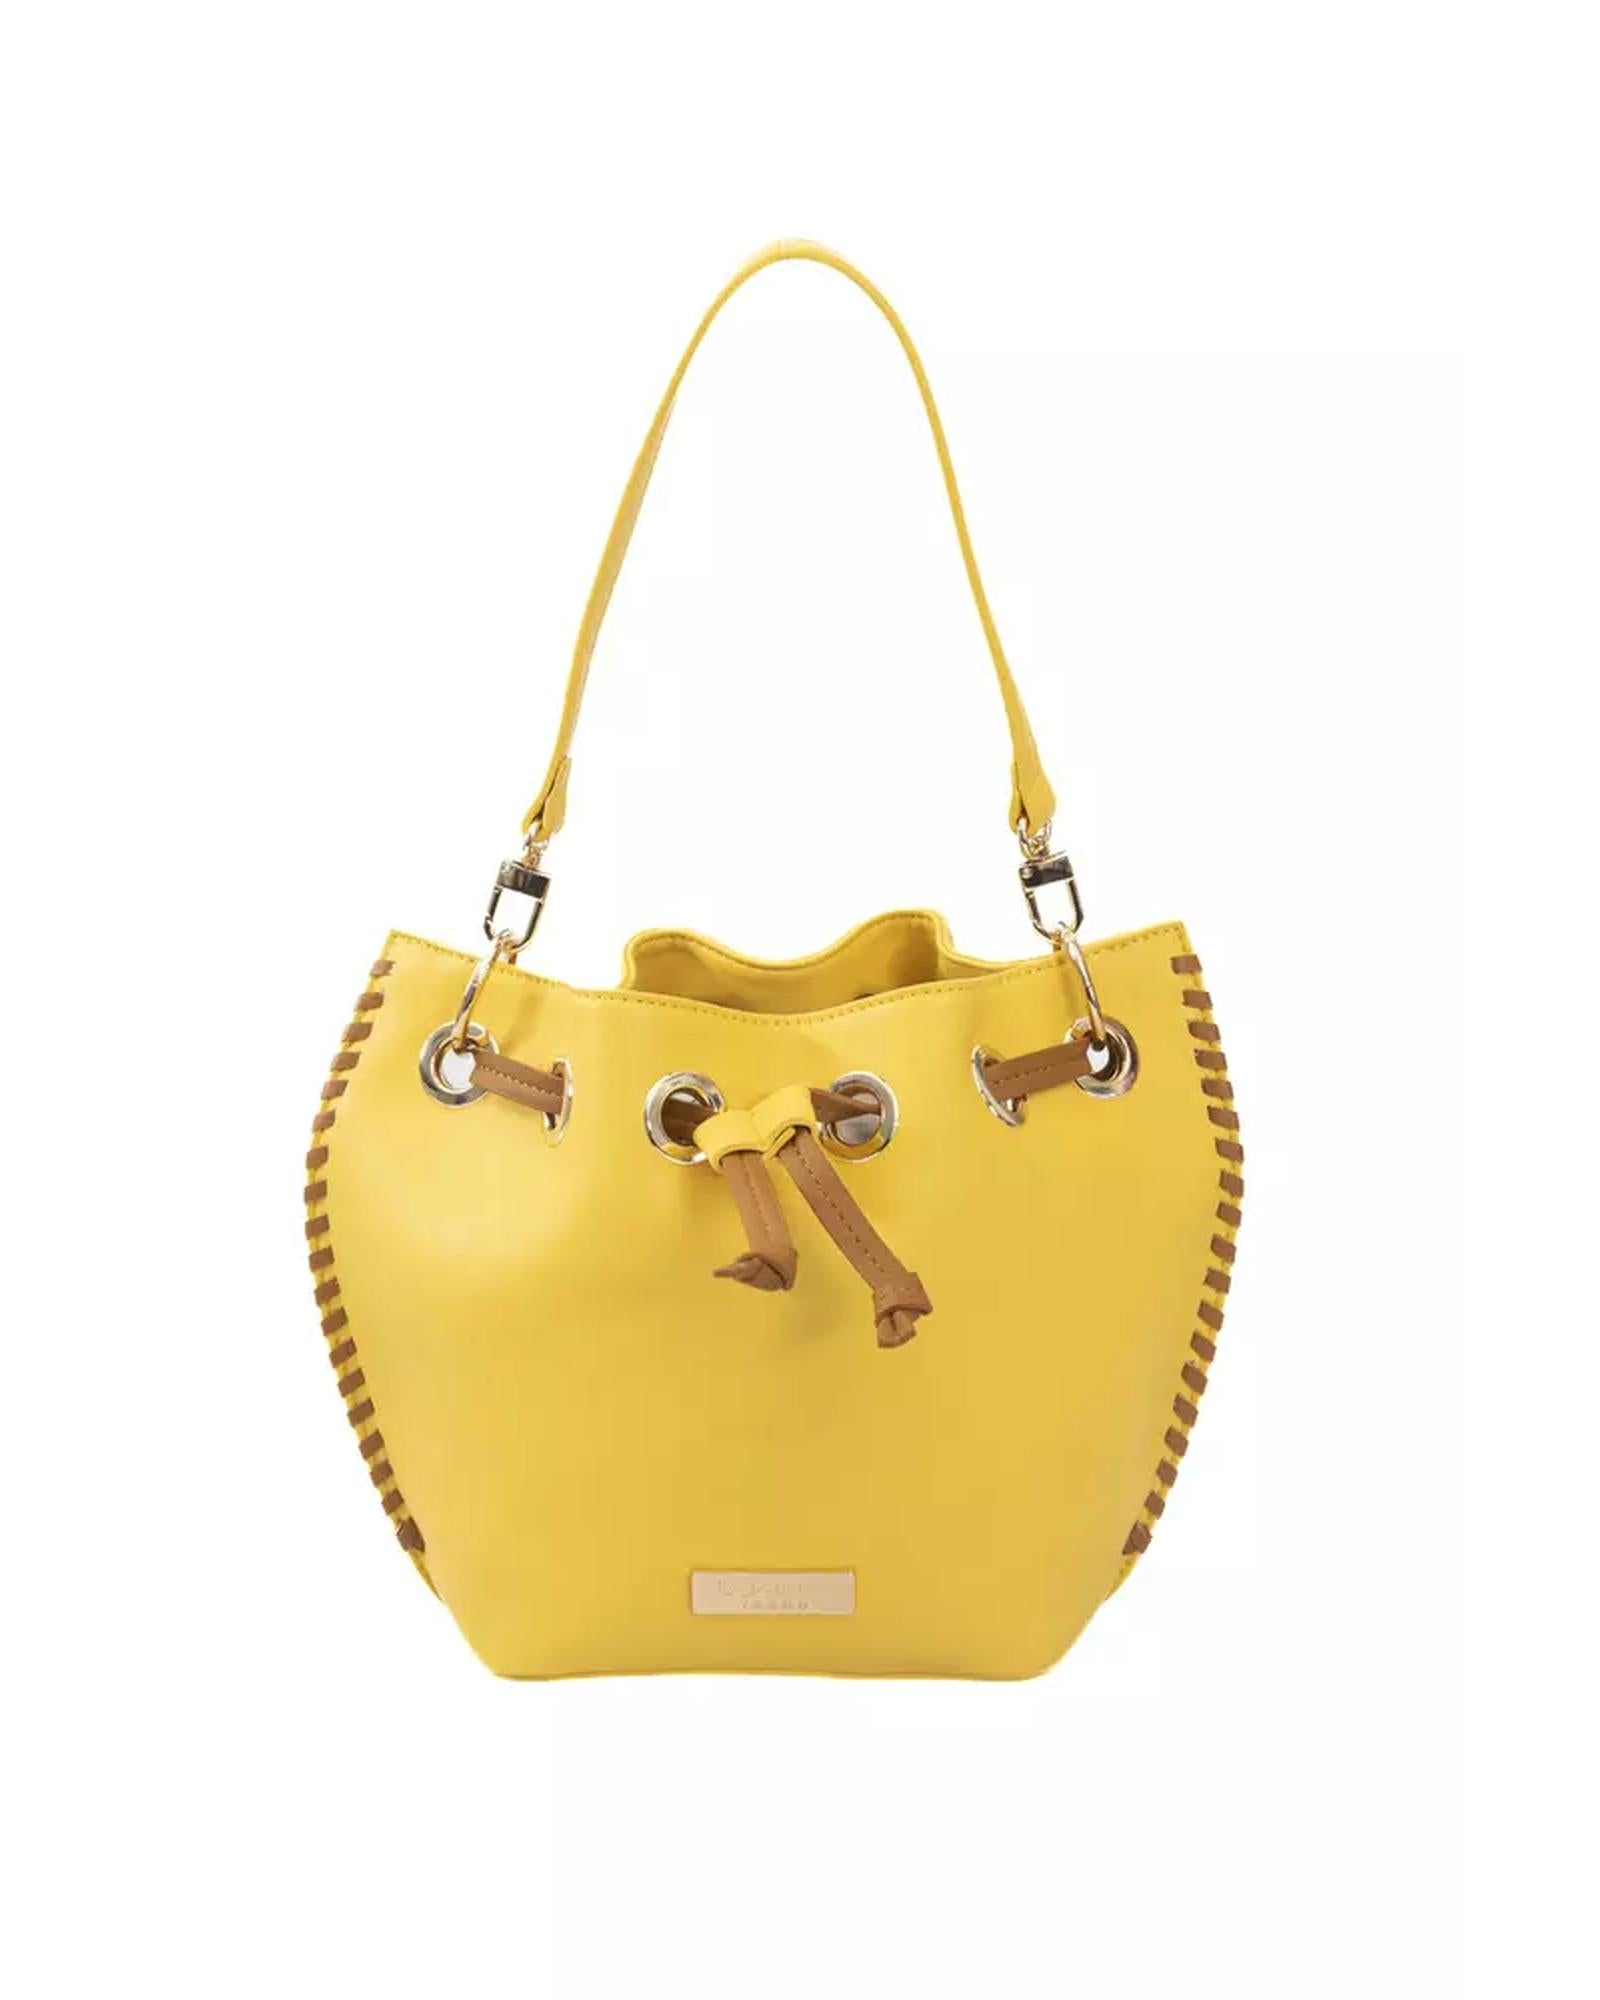 Golden Logoed Shoulder Bag with Drawstring Closure and Internal Compartments One Size Women